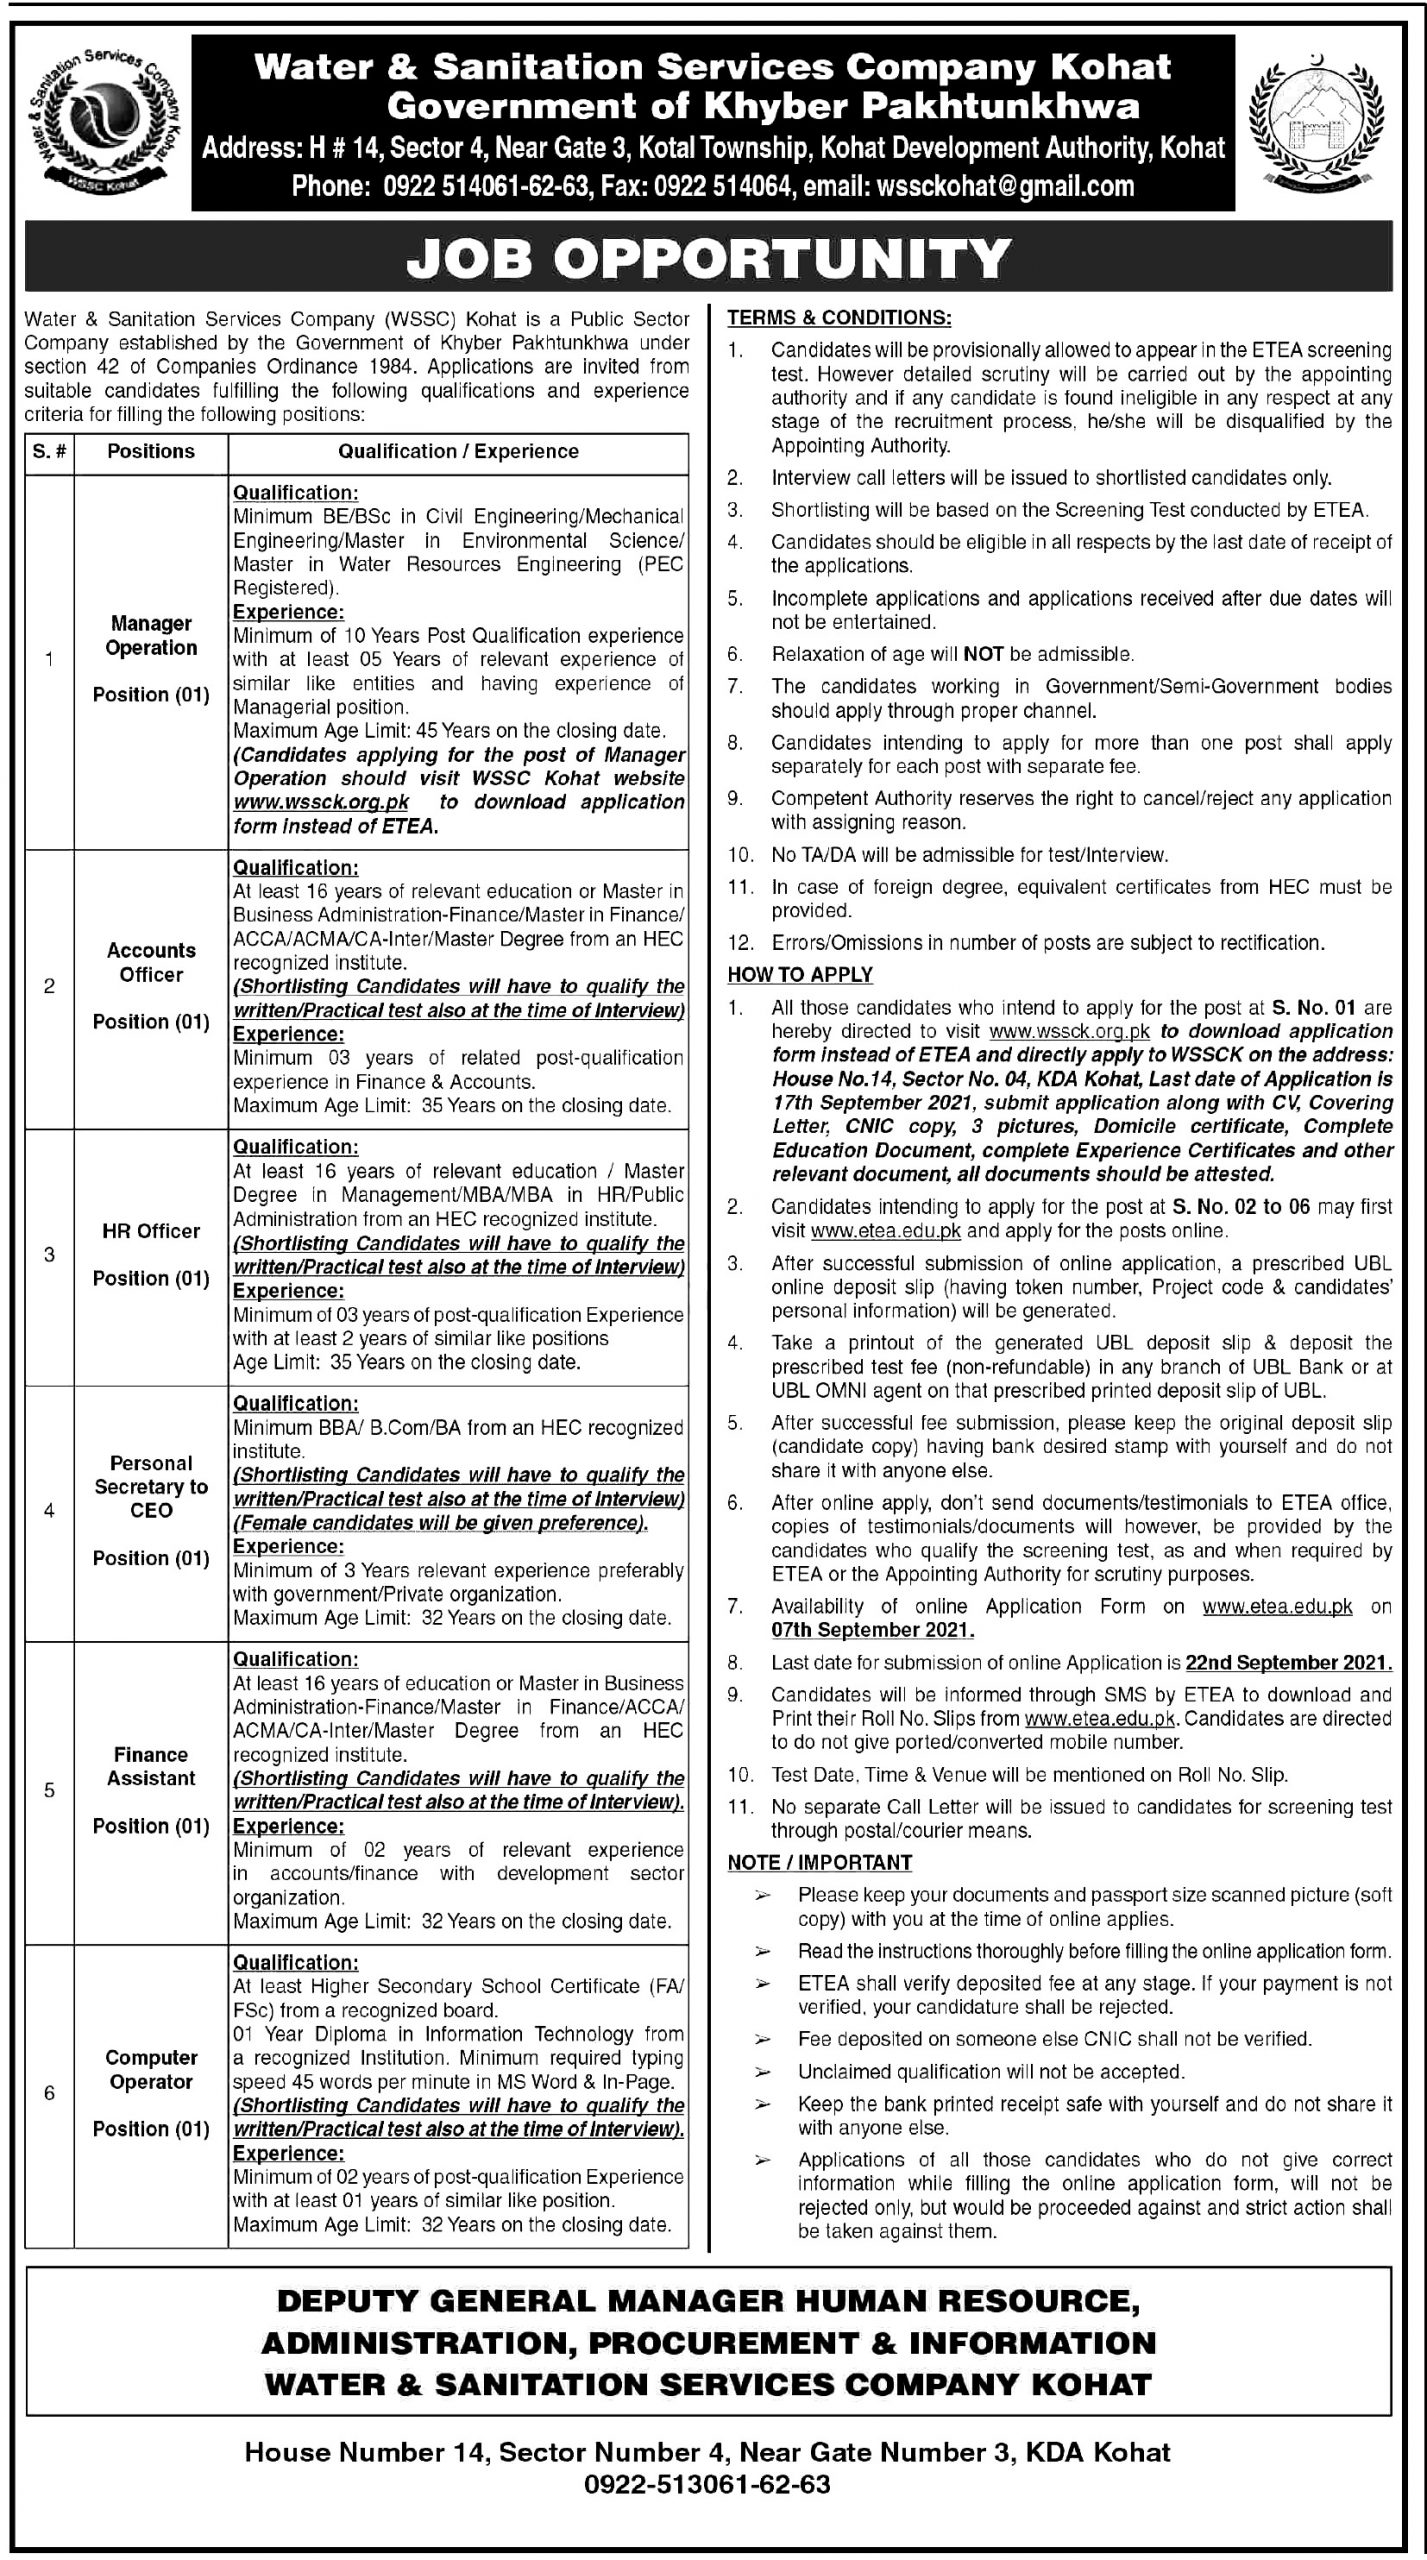 Water and Sanitation Services Kohat Jobs 2021 ETEA Application Form